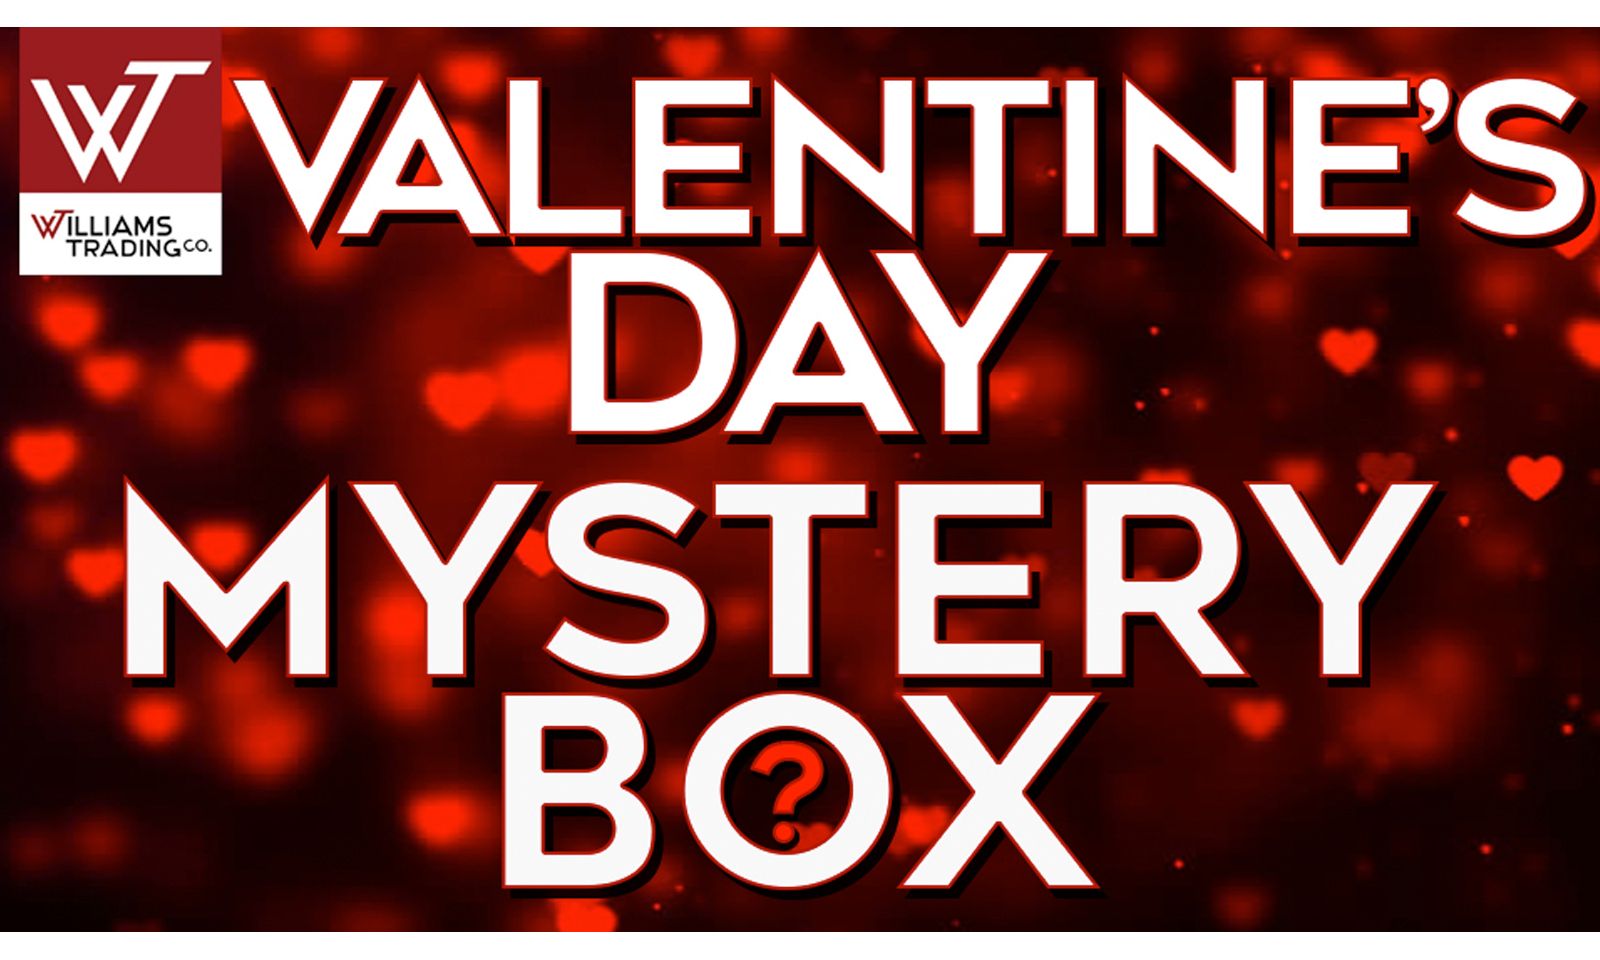 Williams Trading Brings Back Sweetheart Deal Mystery Box